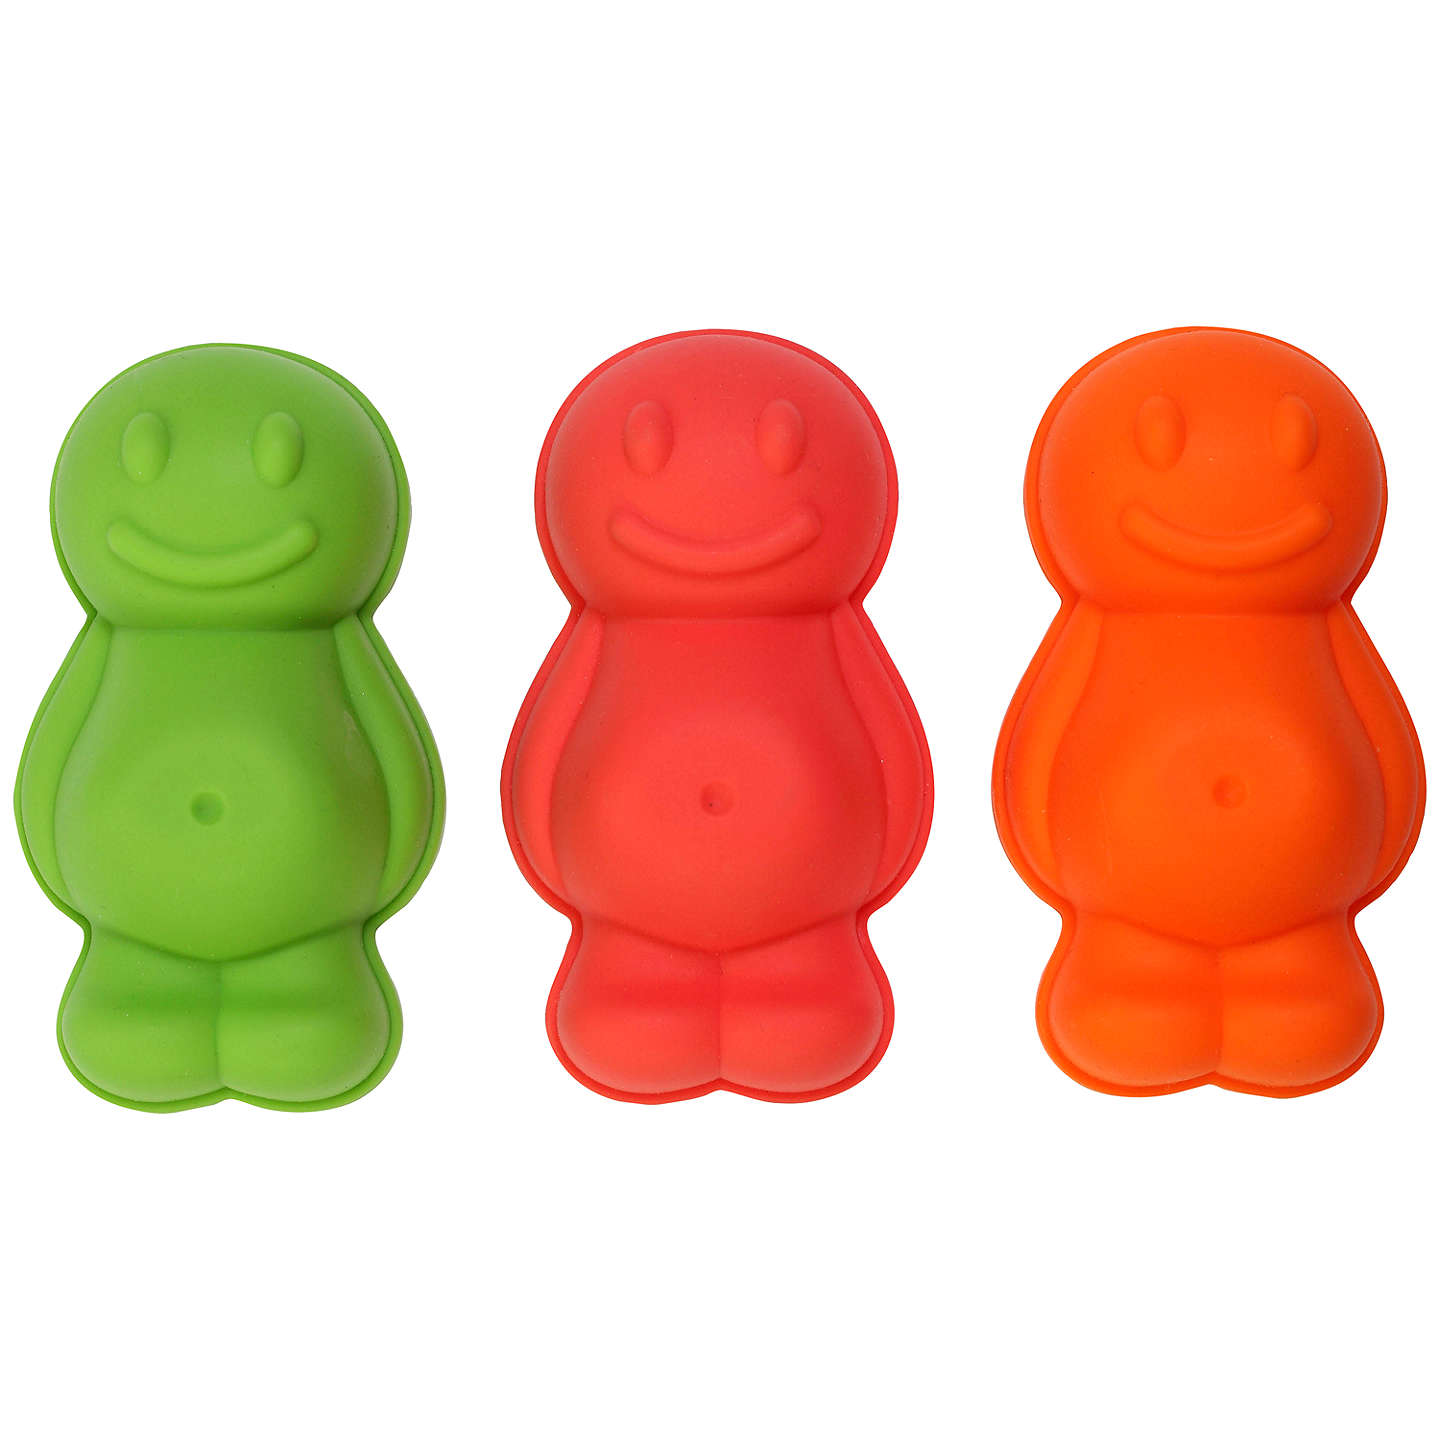 Offer: Swift Jelly Baby Moulds, Set of 3 at John Lewis